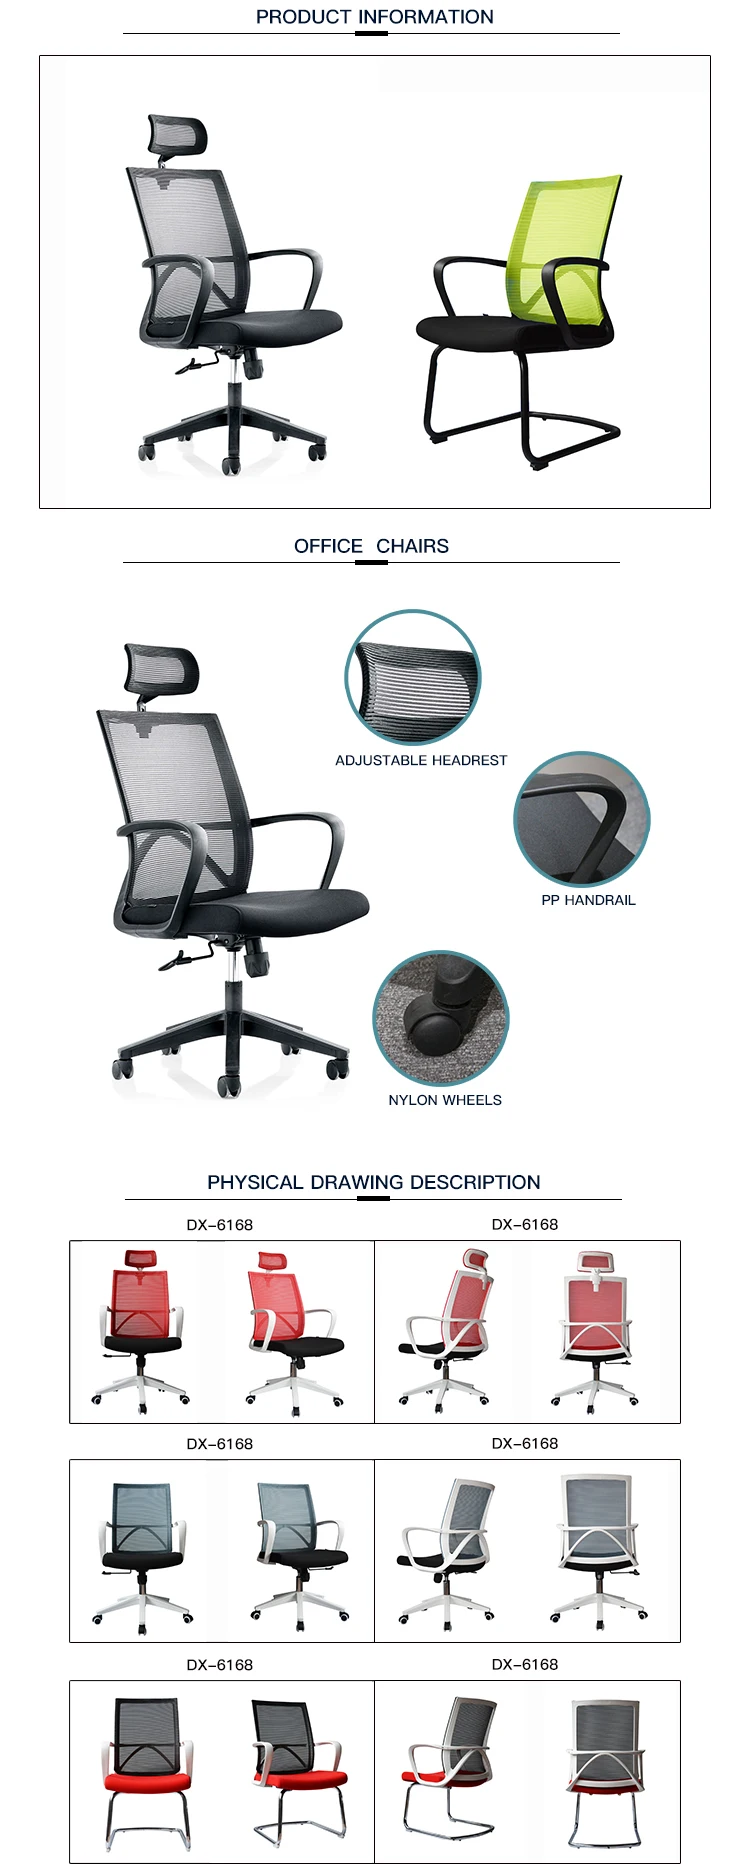 Dious hot sale office chair black frame gaming chair student PP staff reclining office chairs with wheels